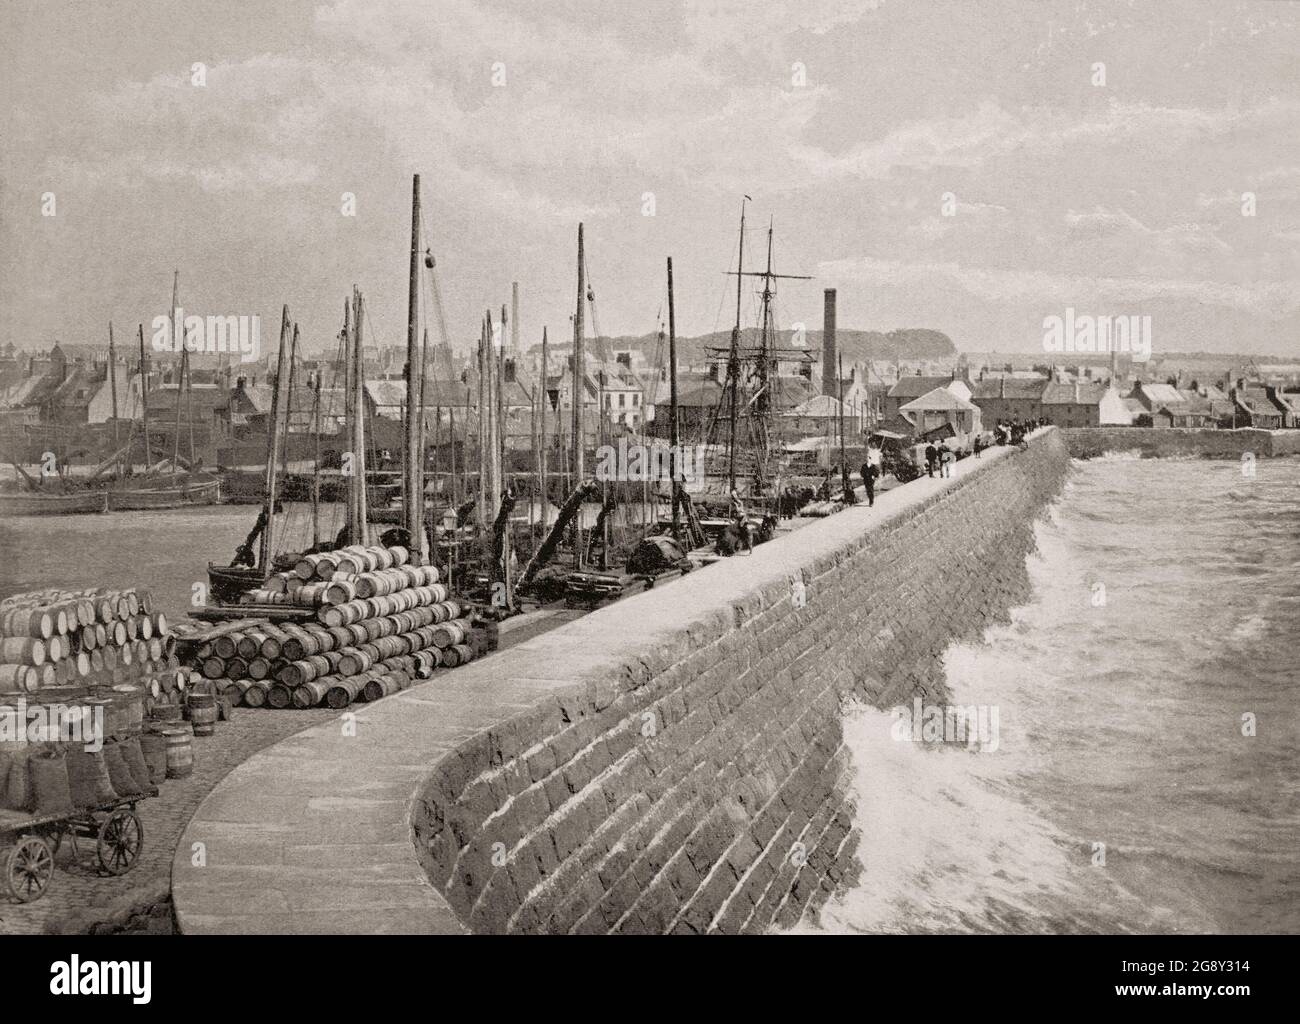 A late 19th century view of the harbour wall at Arbroath, a former royal burgh and the largest town in the council area of Angus, Scotland. The new harbour created in 1839 and by the 20th century, Arbroath was one of Scotland's larger fishing ports. It is notable for the Declaration of Arbroath and the Arbroath smokie. Stock Photo